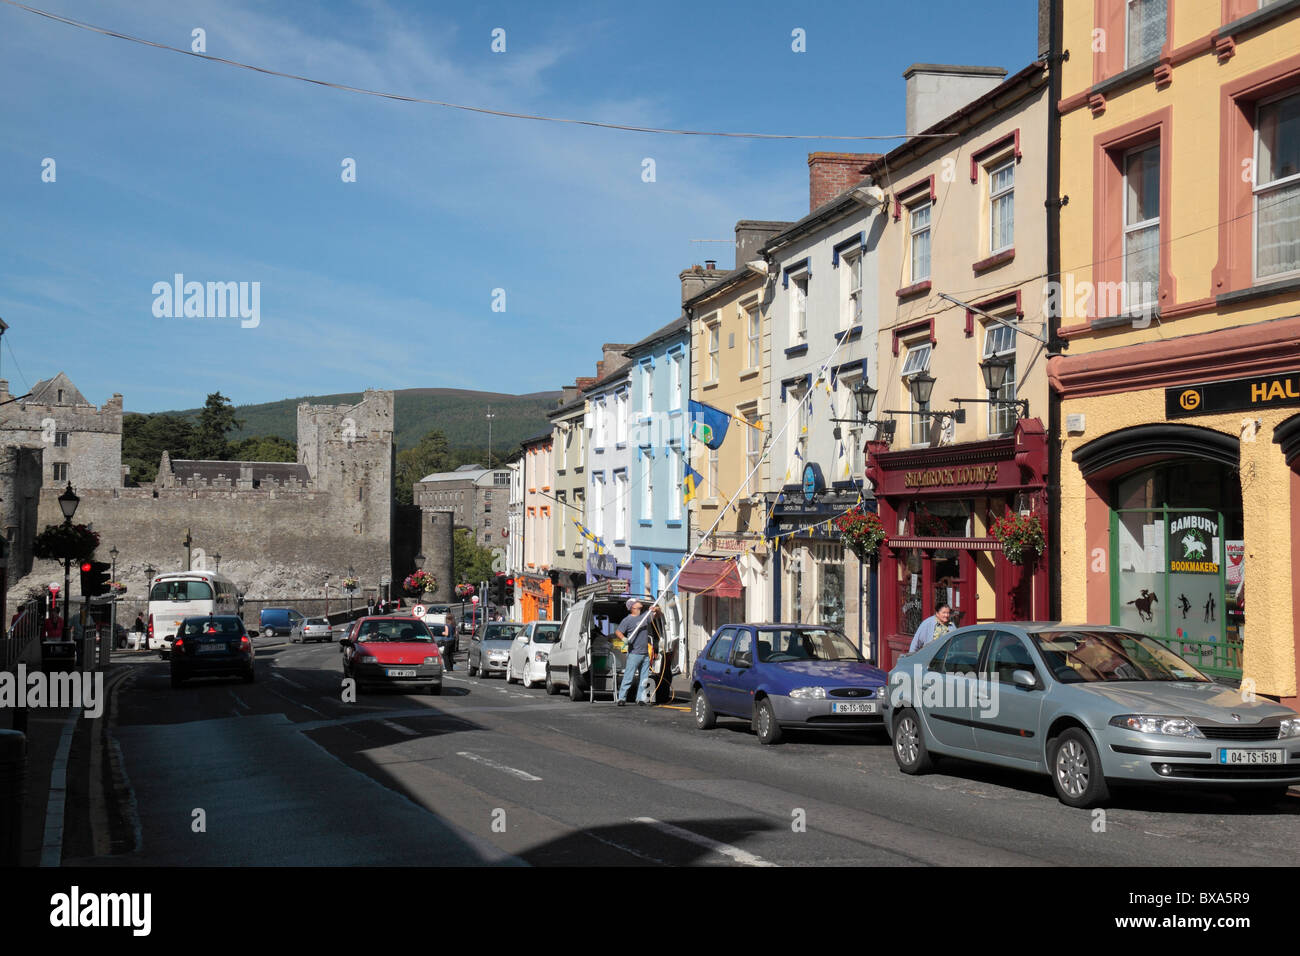 A view along a parade of colourful shops on Castle Street in Cahir towards Cahir Castle, Co Tipperary, Ireland (Eire). Stock Photo